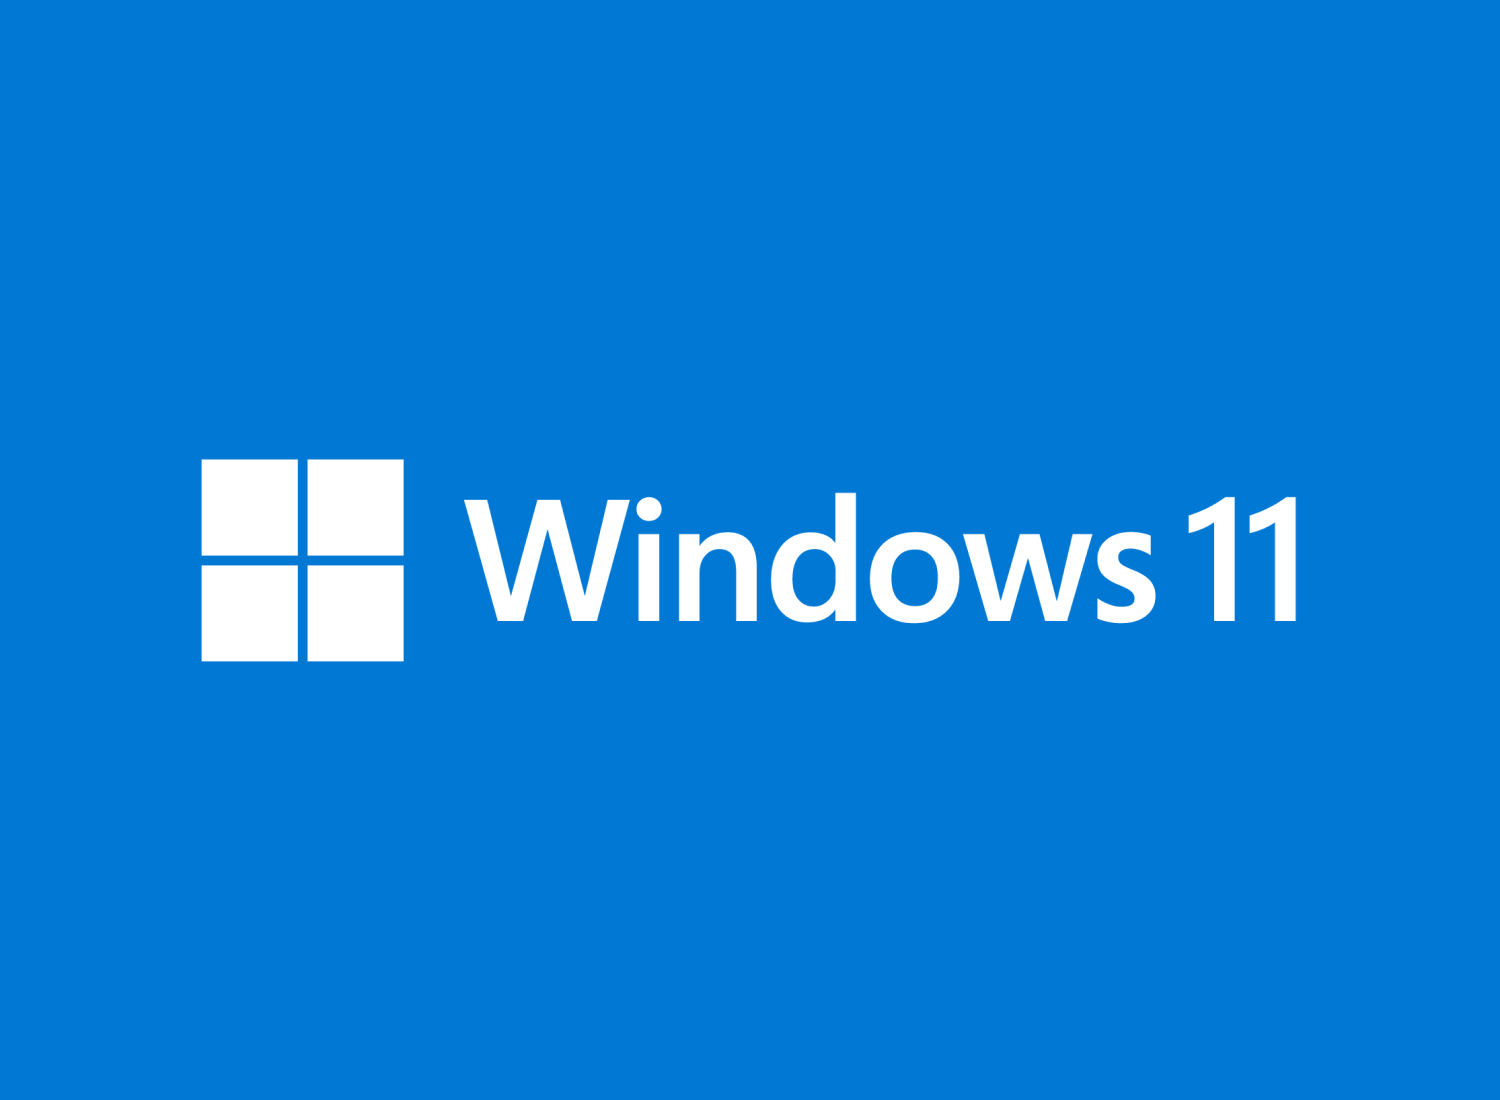 Announcing Windows 11 Insider Preview Build 22616